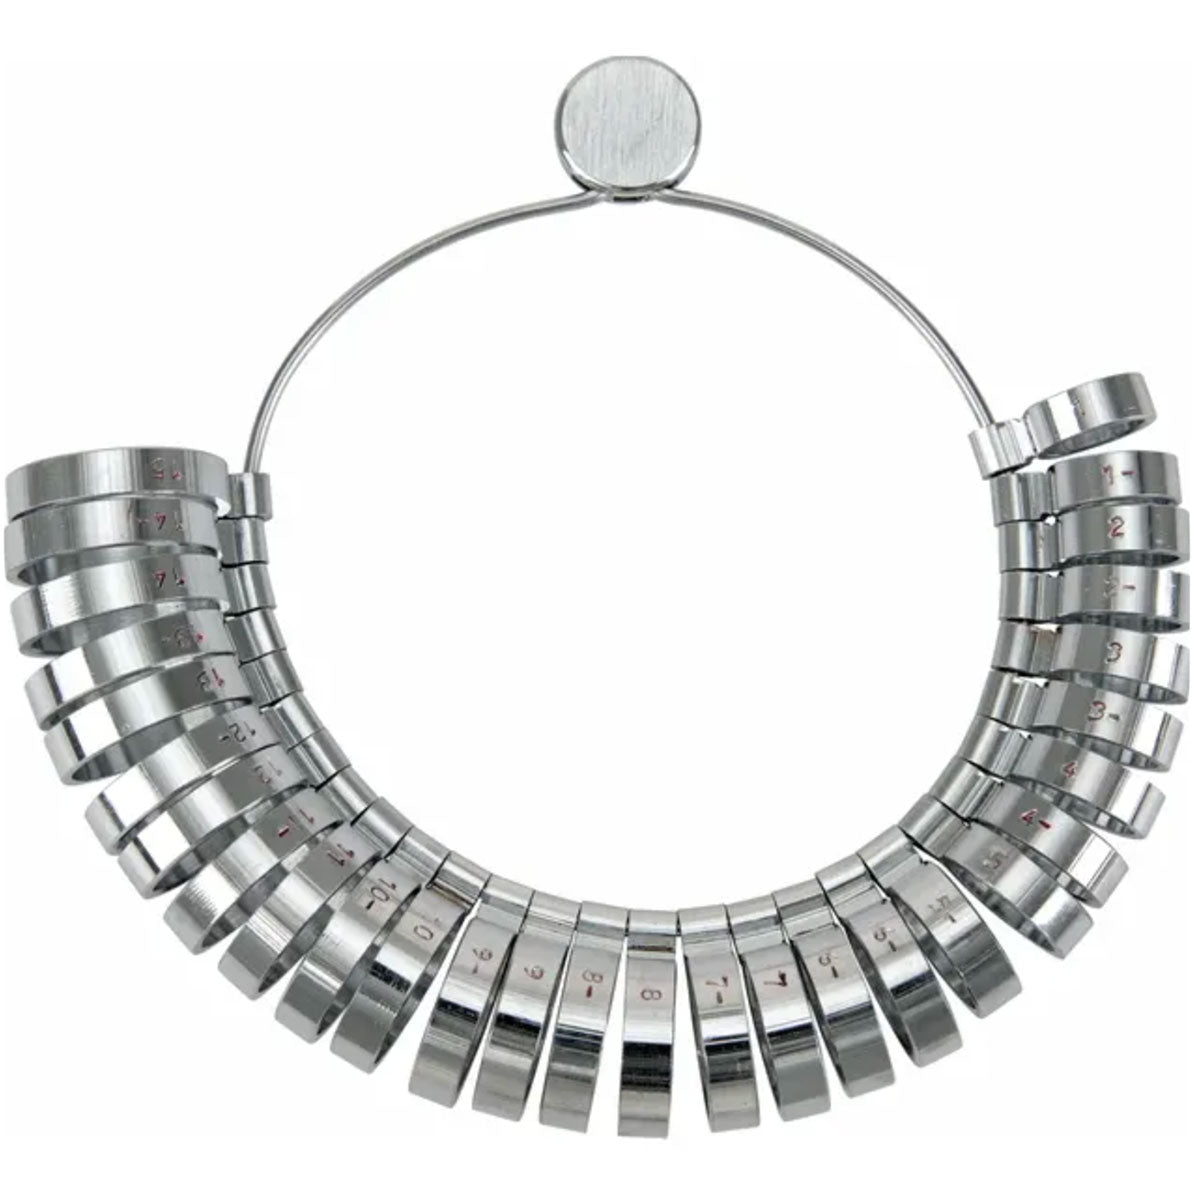 Product photo of wide ring sizer